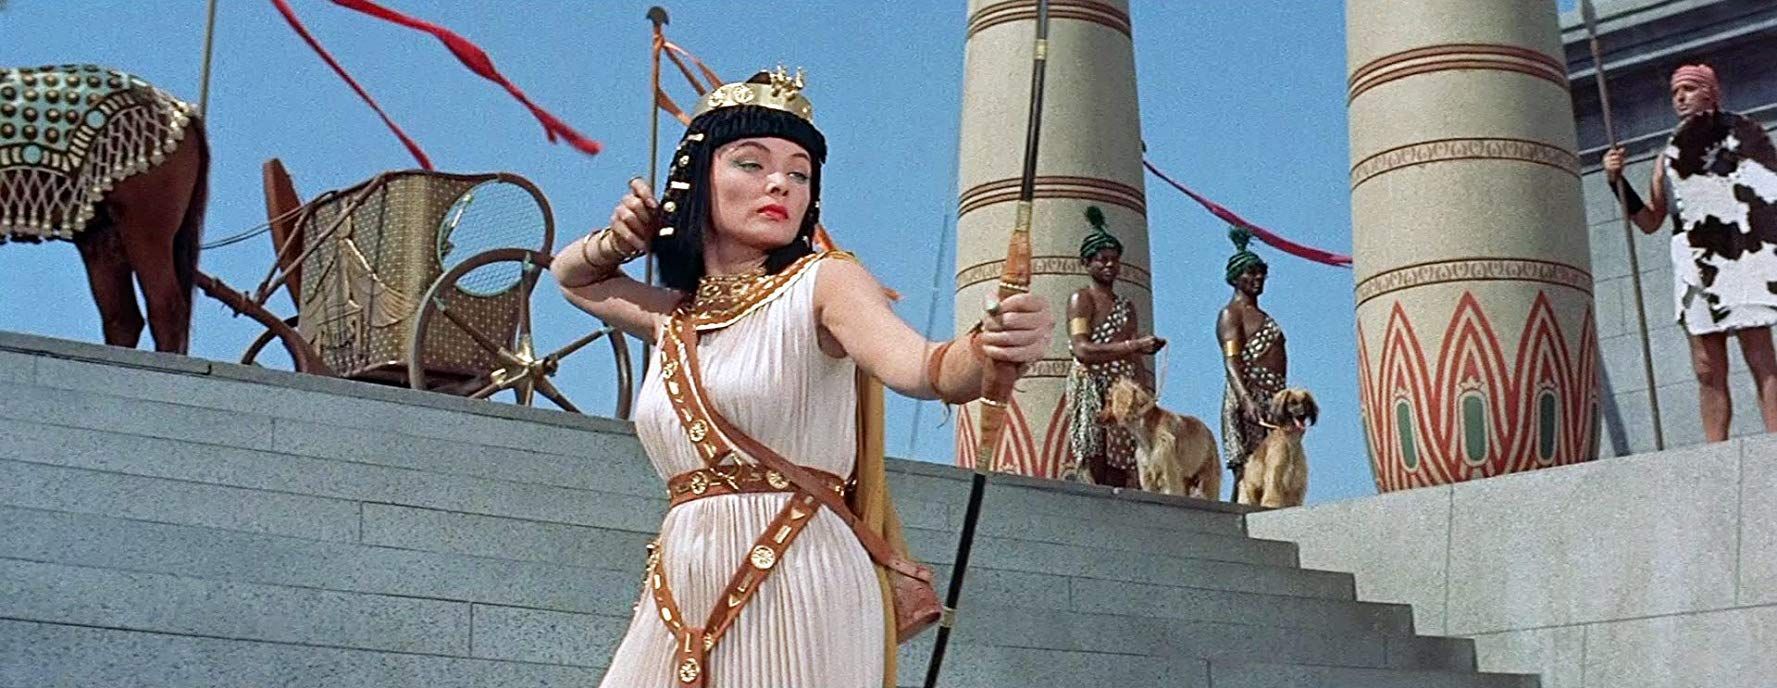 Gene Tierney in The Egyptian (1954)